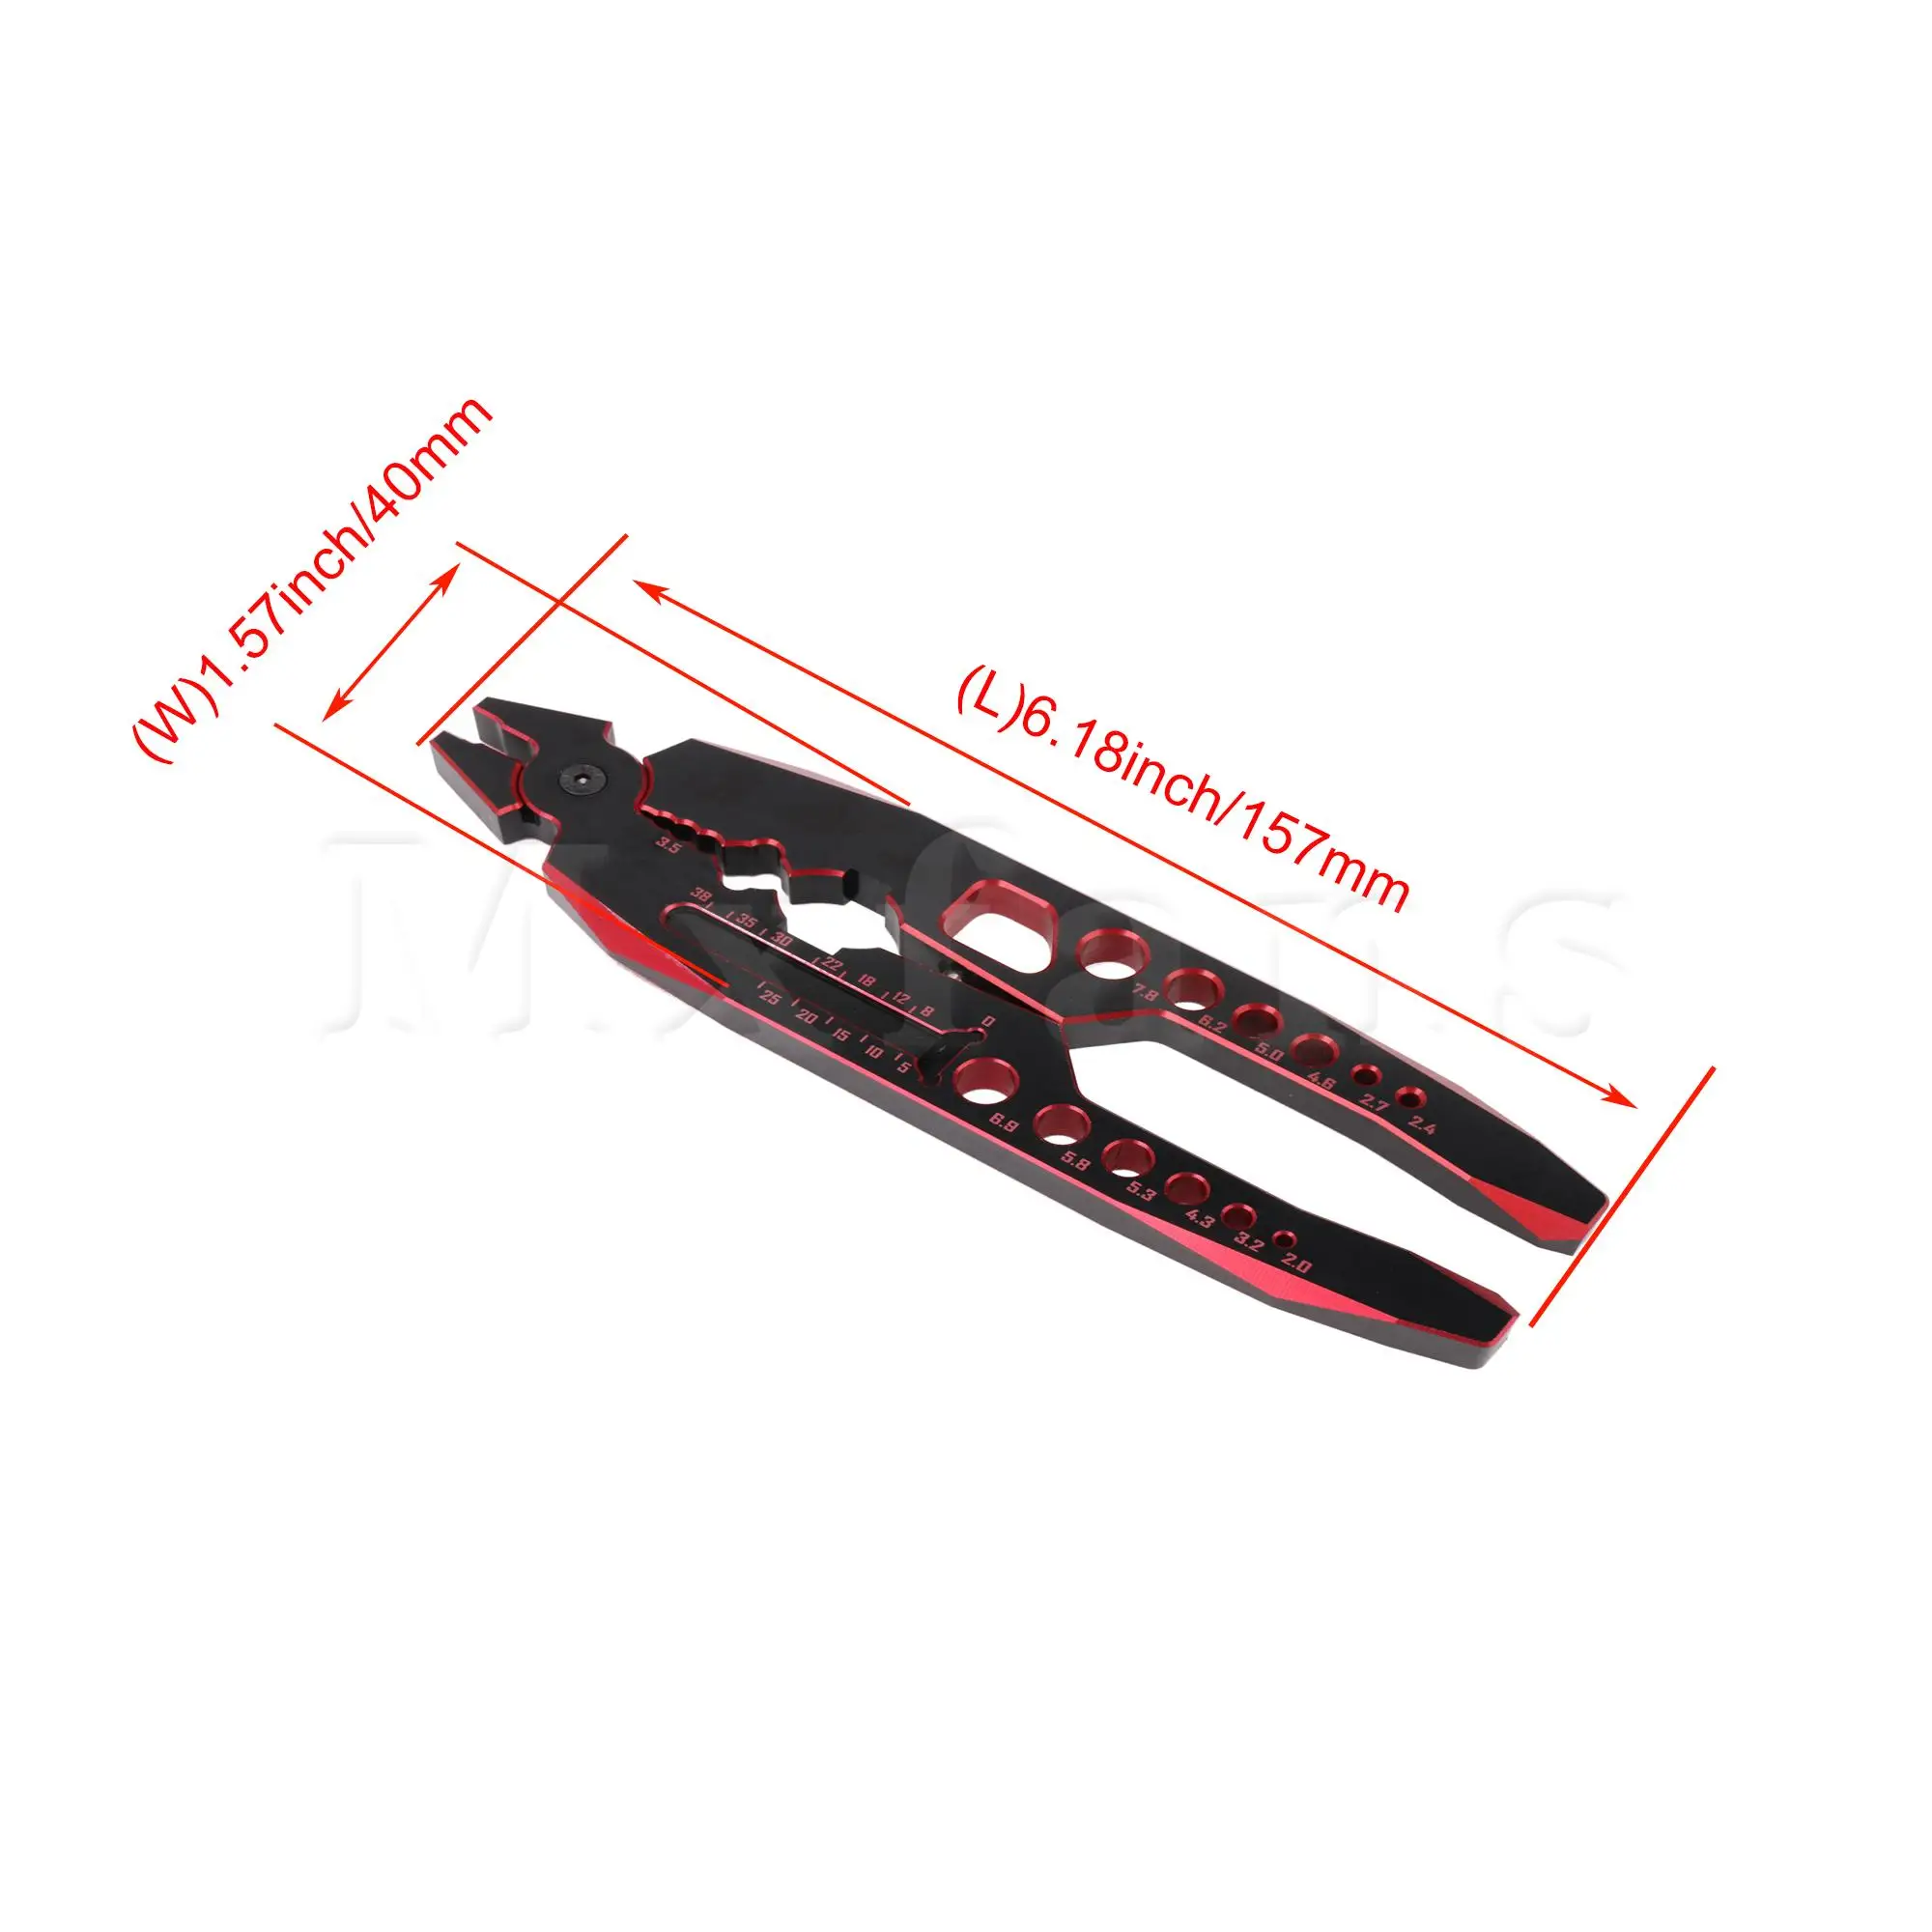 

Mxfans RC 1:8 1:10 Black Red Shock Pliers Clamp Tool Replacemeen for Traxxas